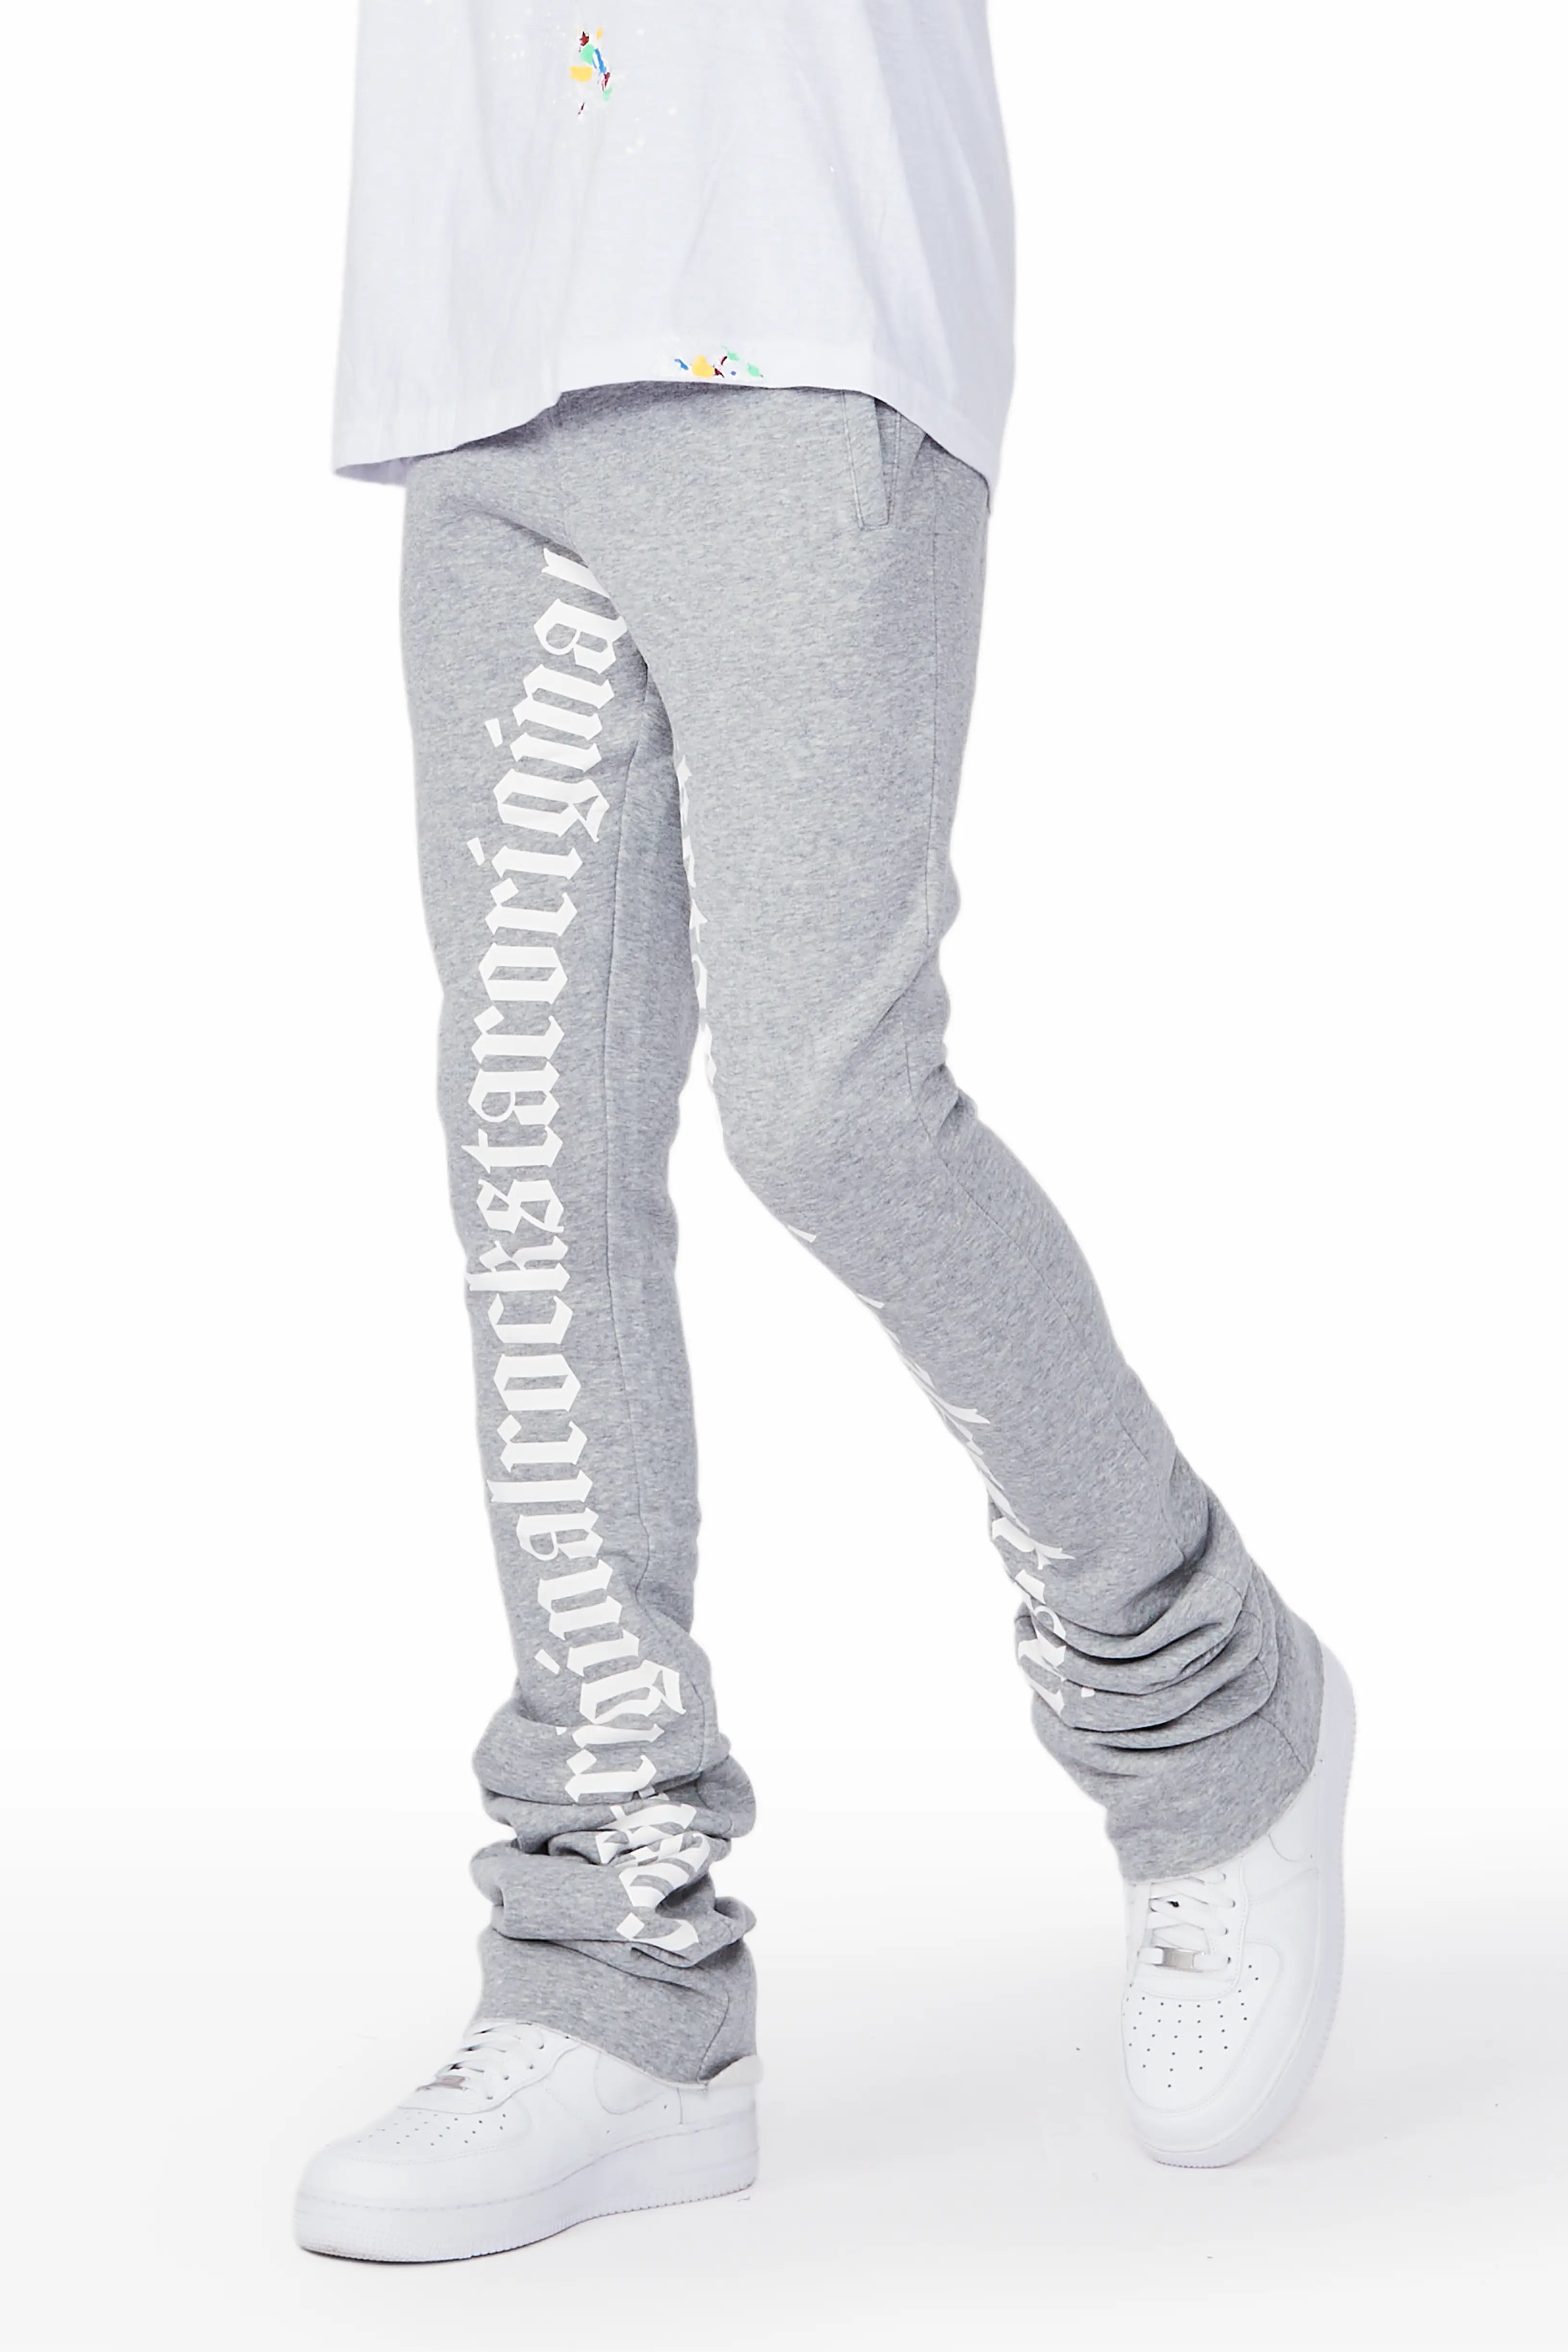 Callie Heather Grey Super Stacked Pants